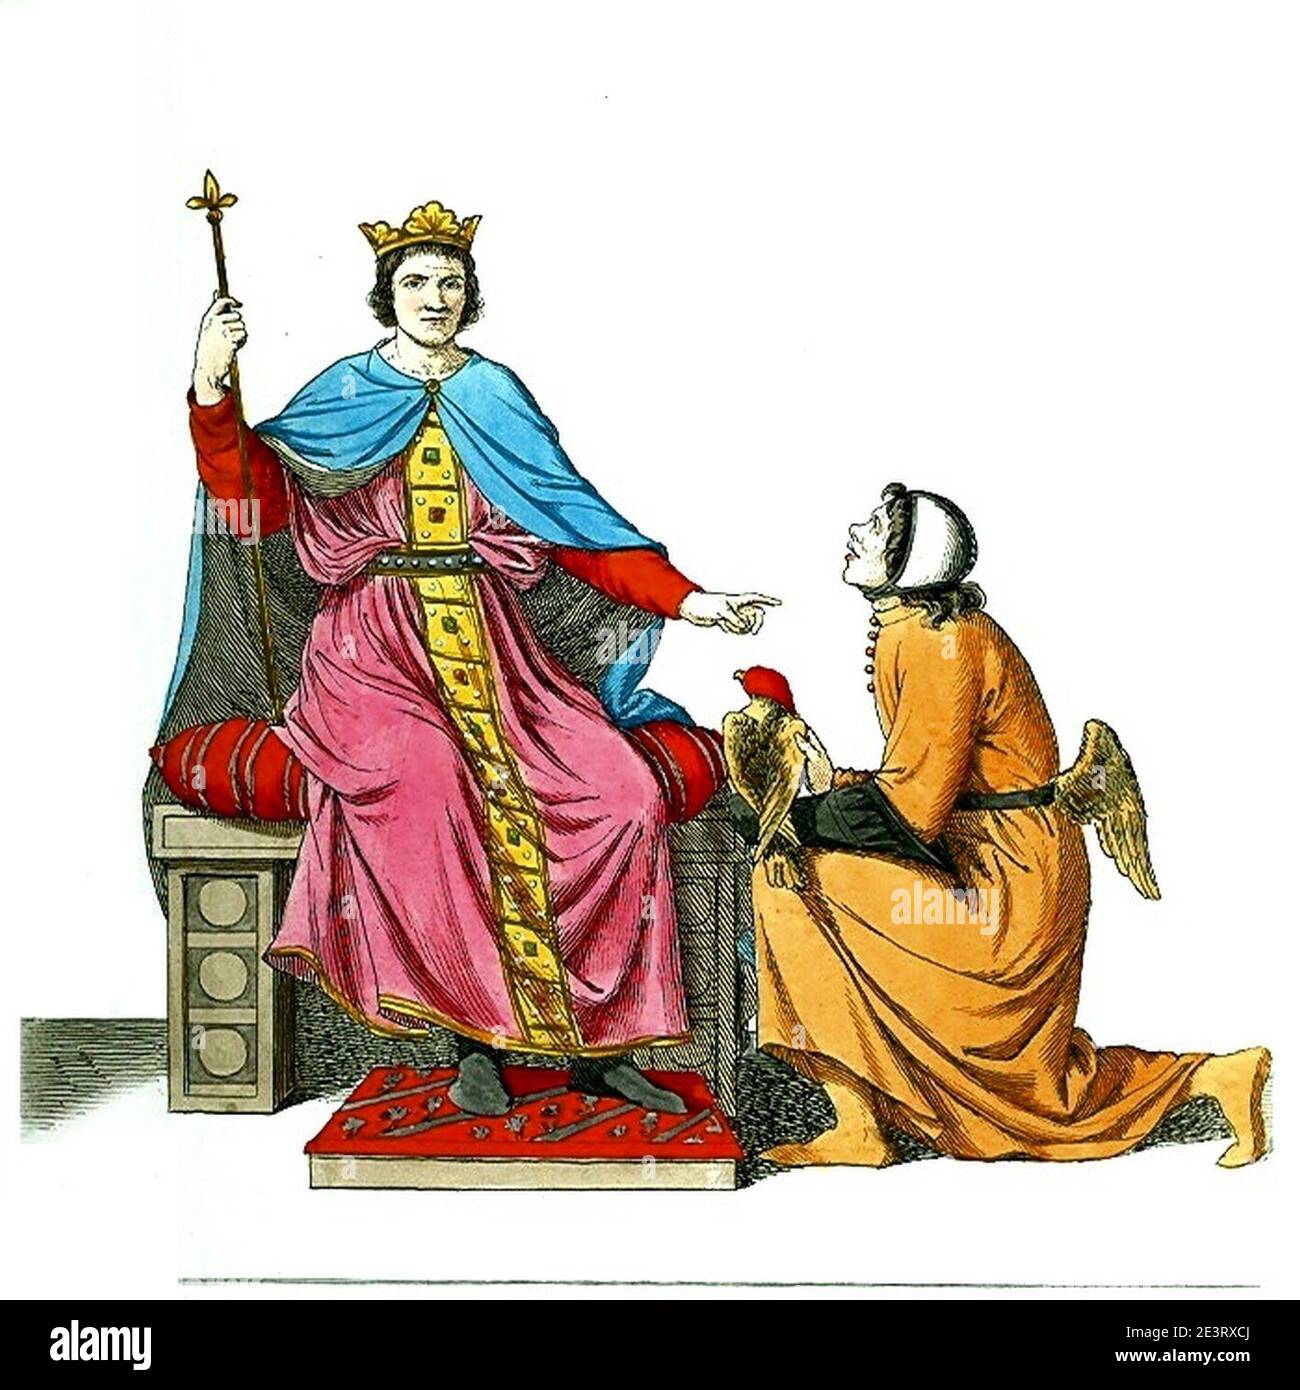 Man or King on Throne with Kneeling Man (Supplicant). Stock Photo